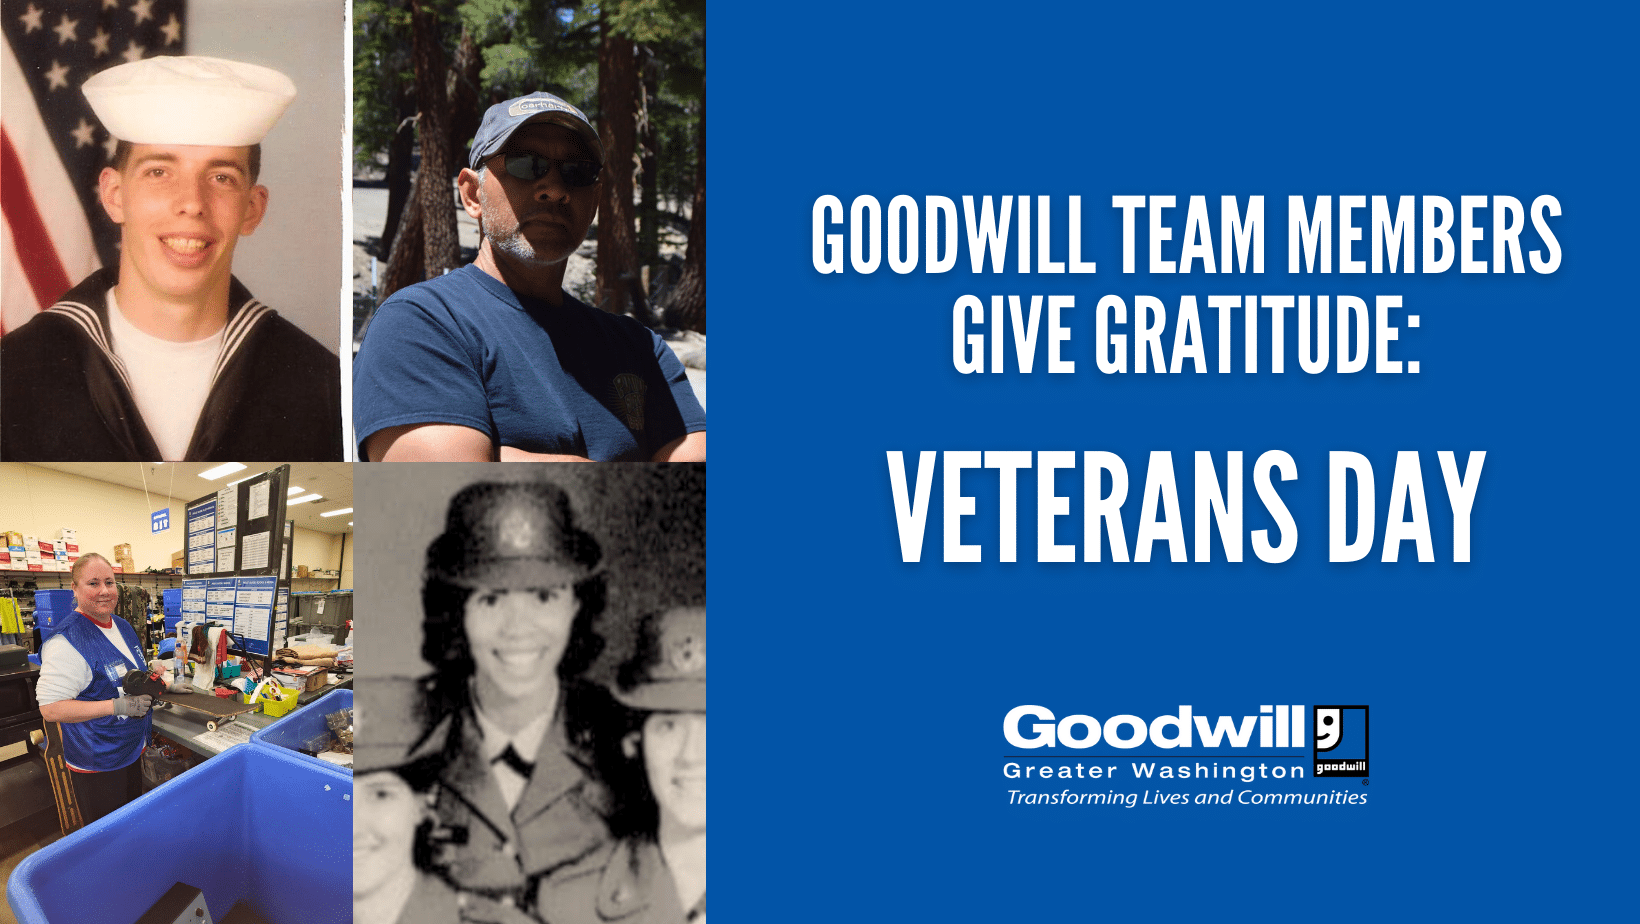 Words of Gratitude to Veterans from Goodwill Team Members